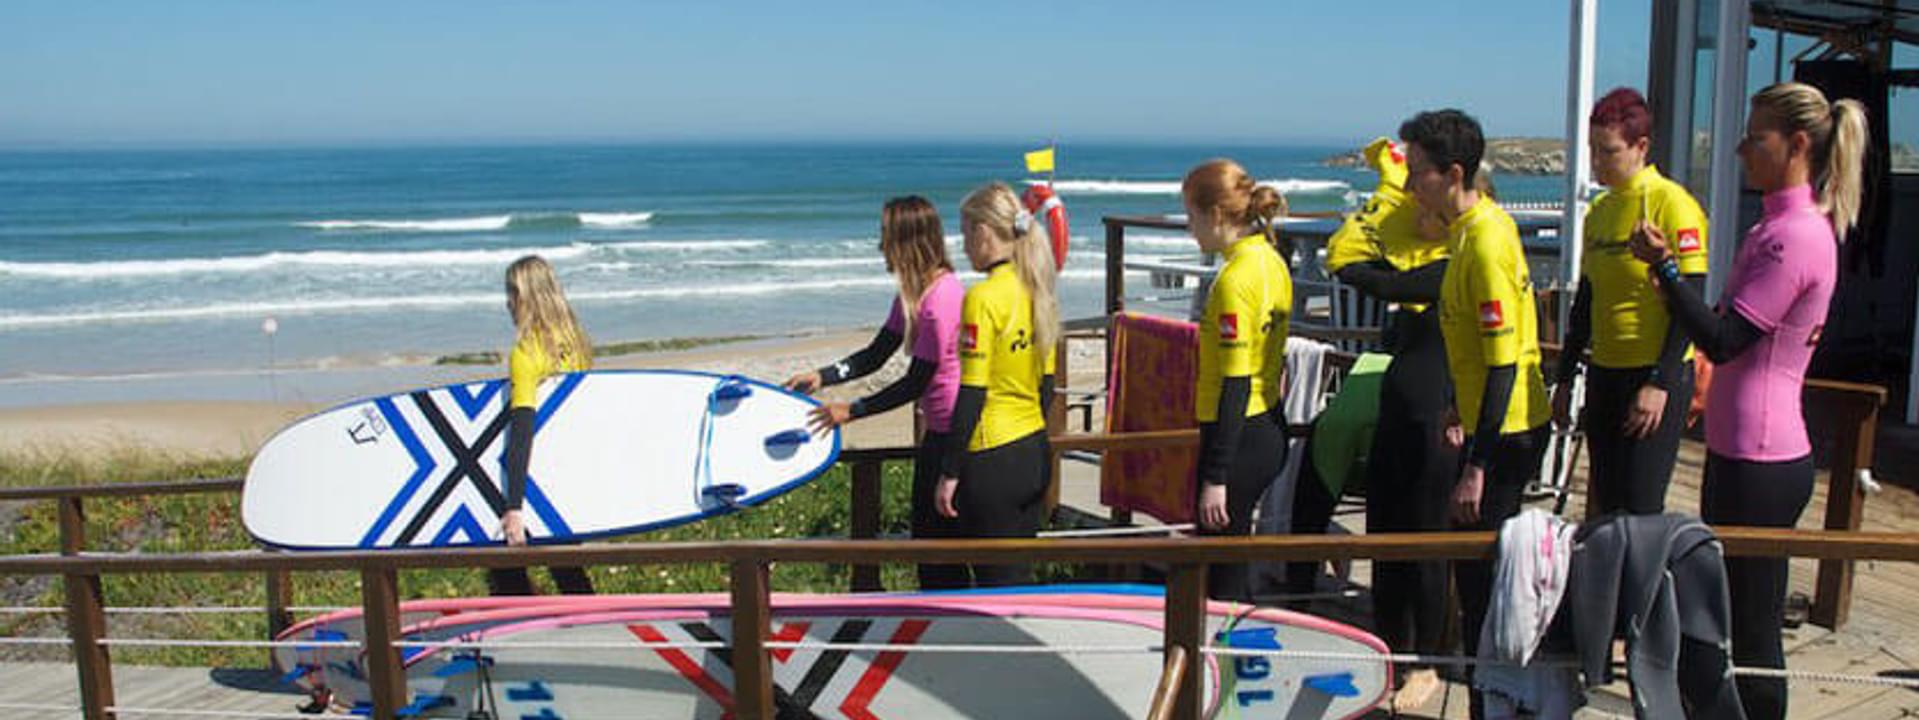 Surf Schools & Surf Houses in Peniche